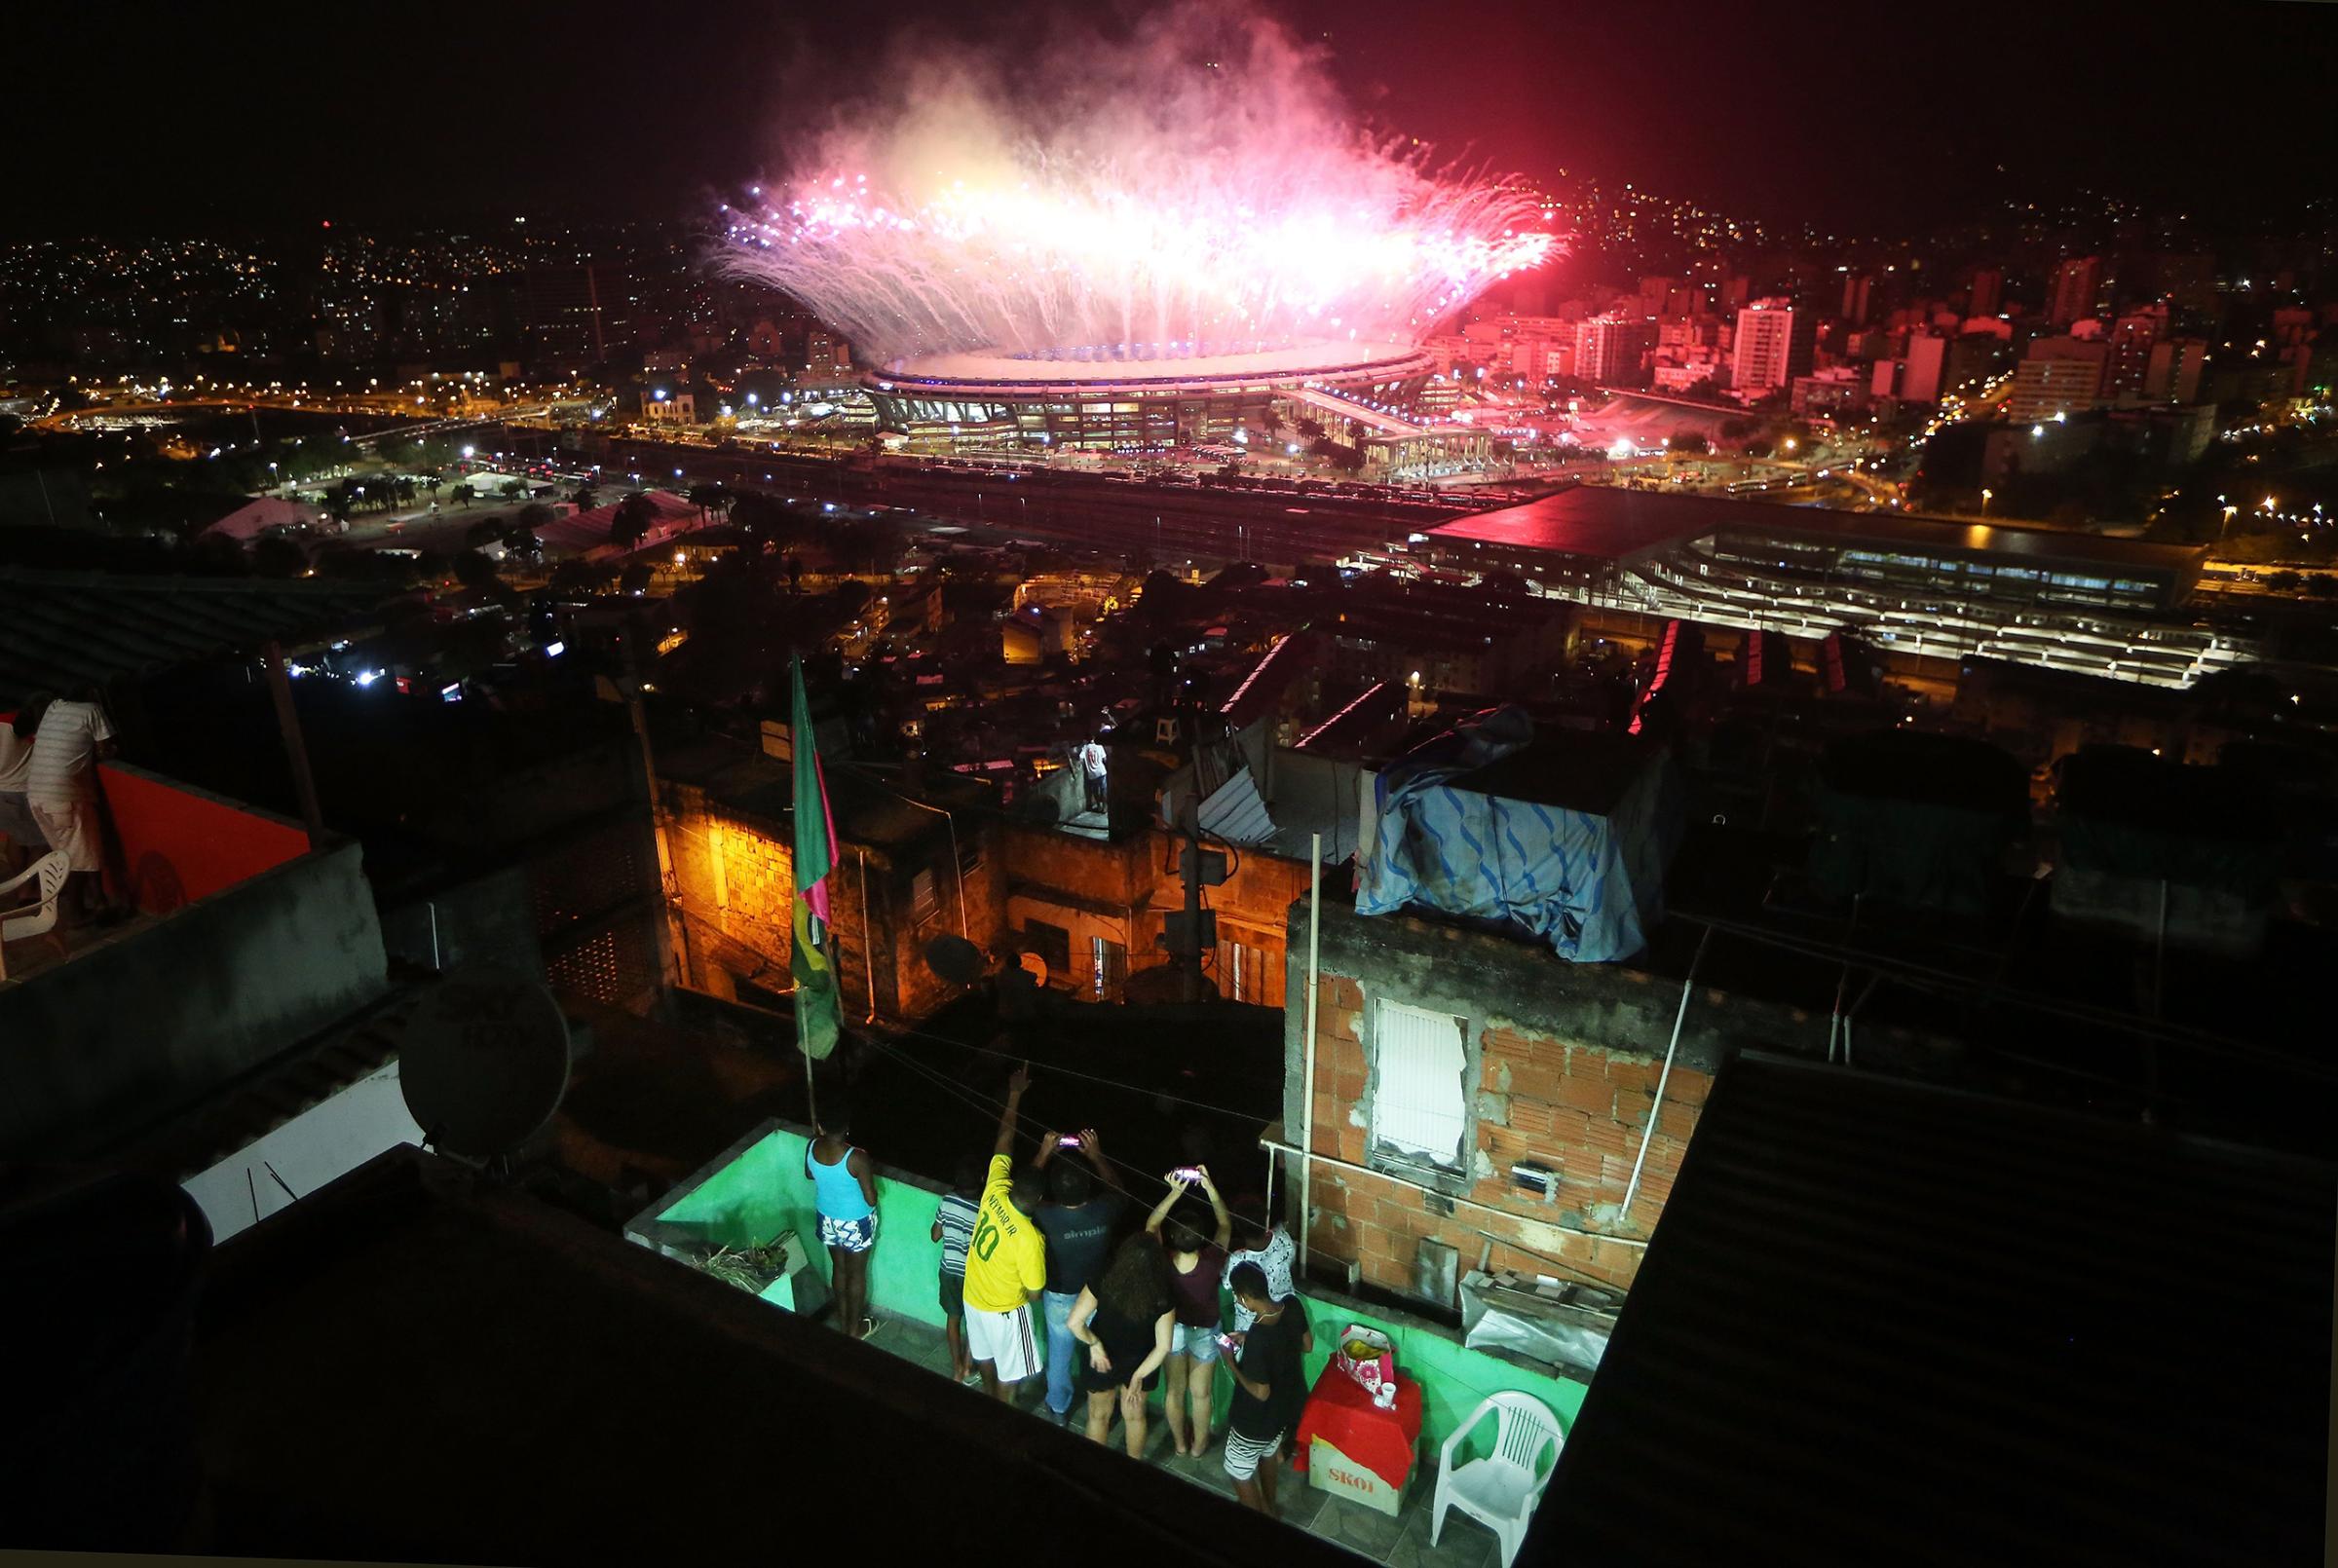 Fireworks explode over Maracana stadium with the Mangueira 'favela' community in the foreground during opening ceremonies for the Rio 2016 Olympic Games on Aug. 5, 2016.